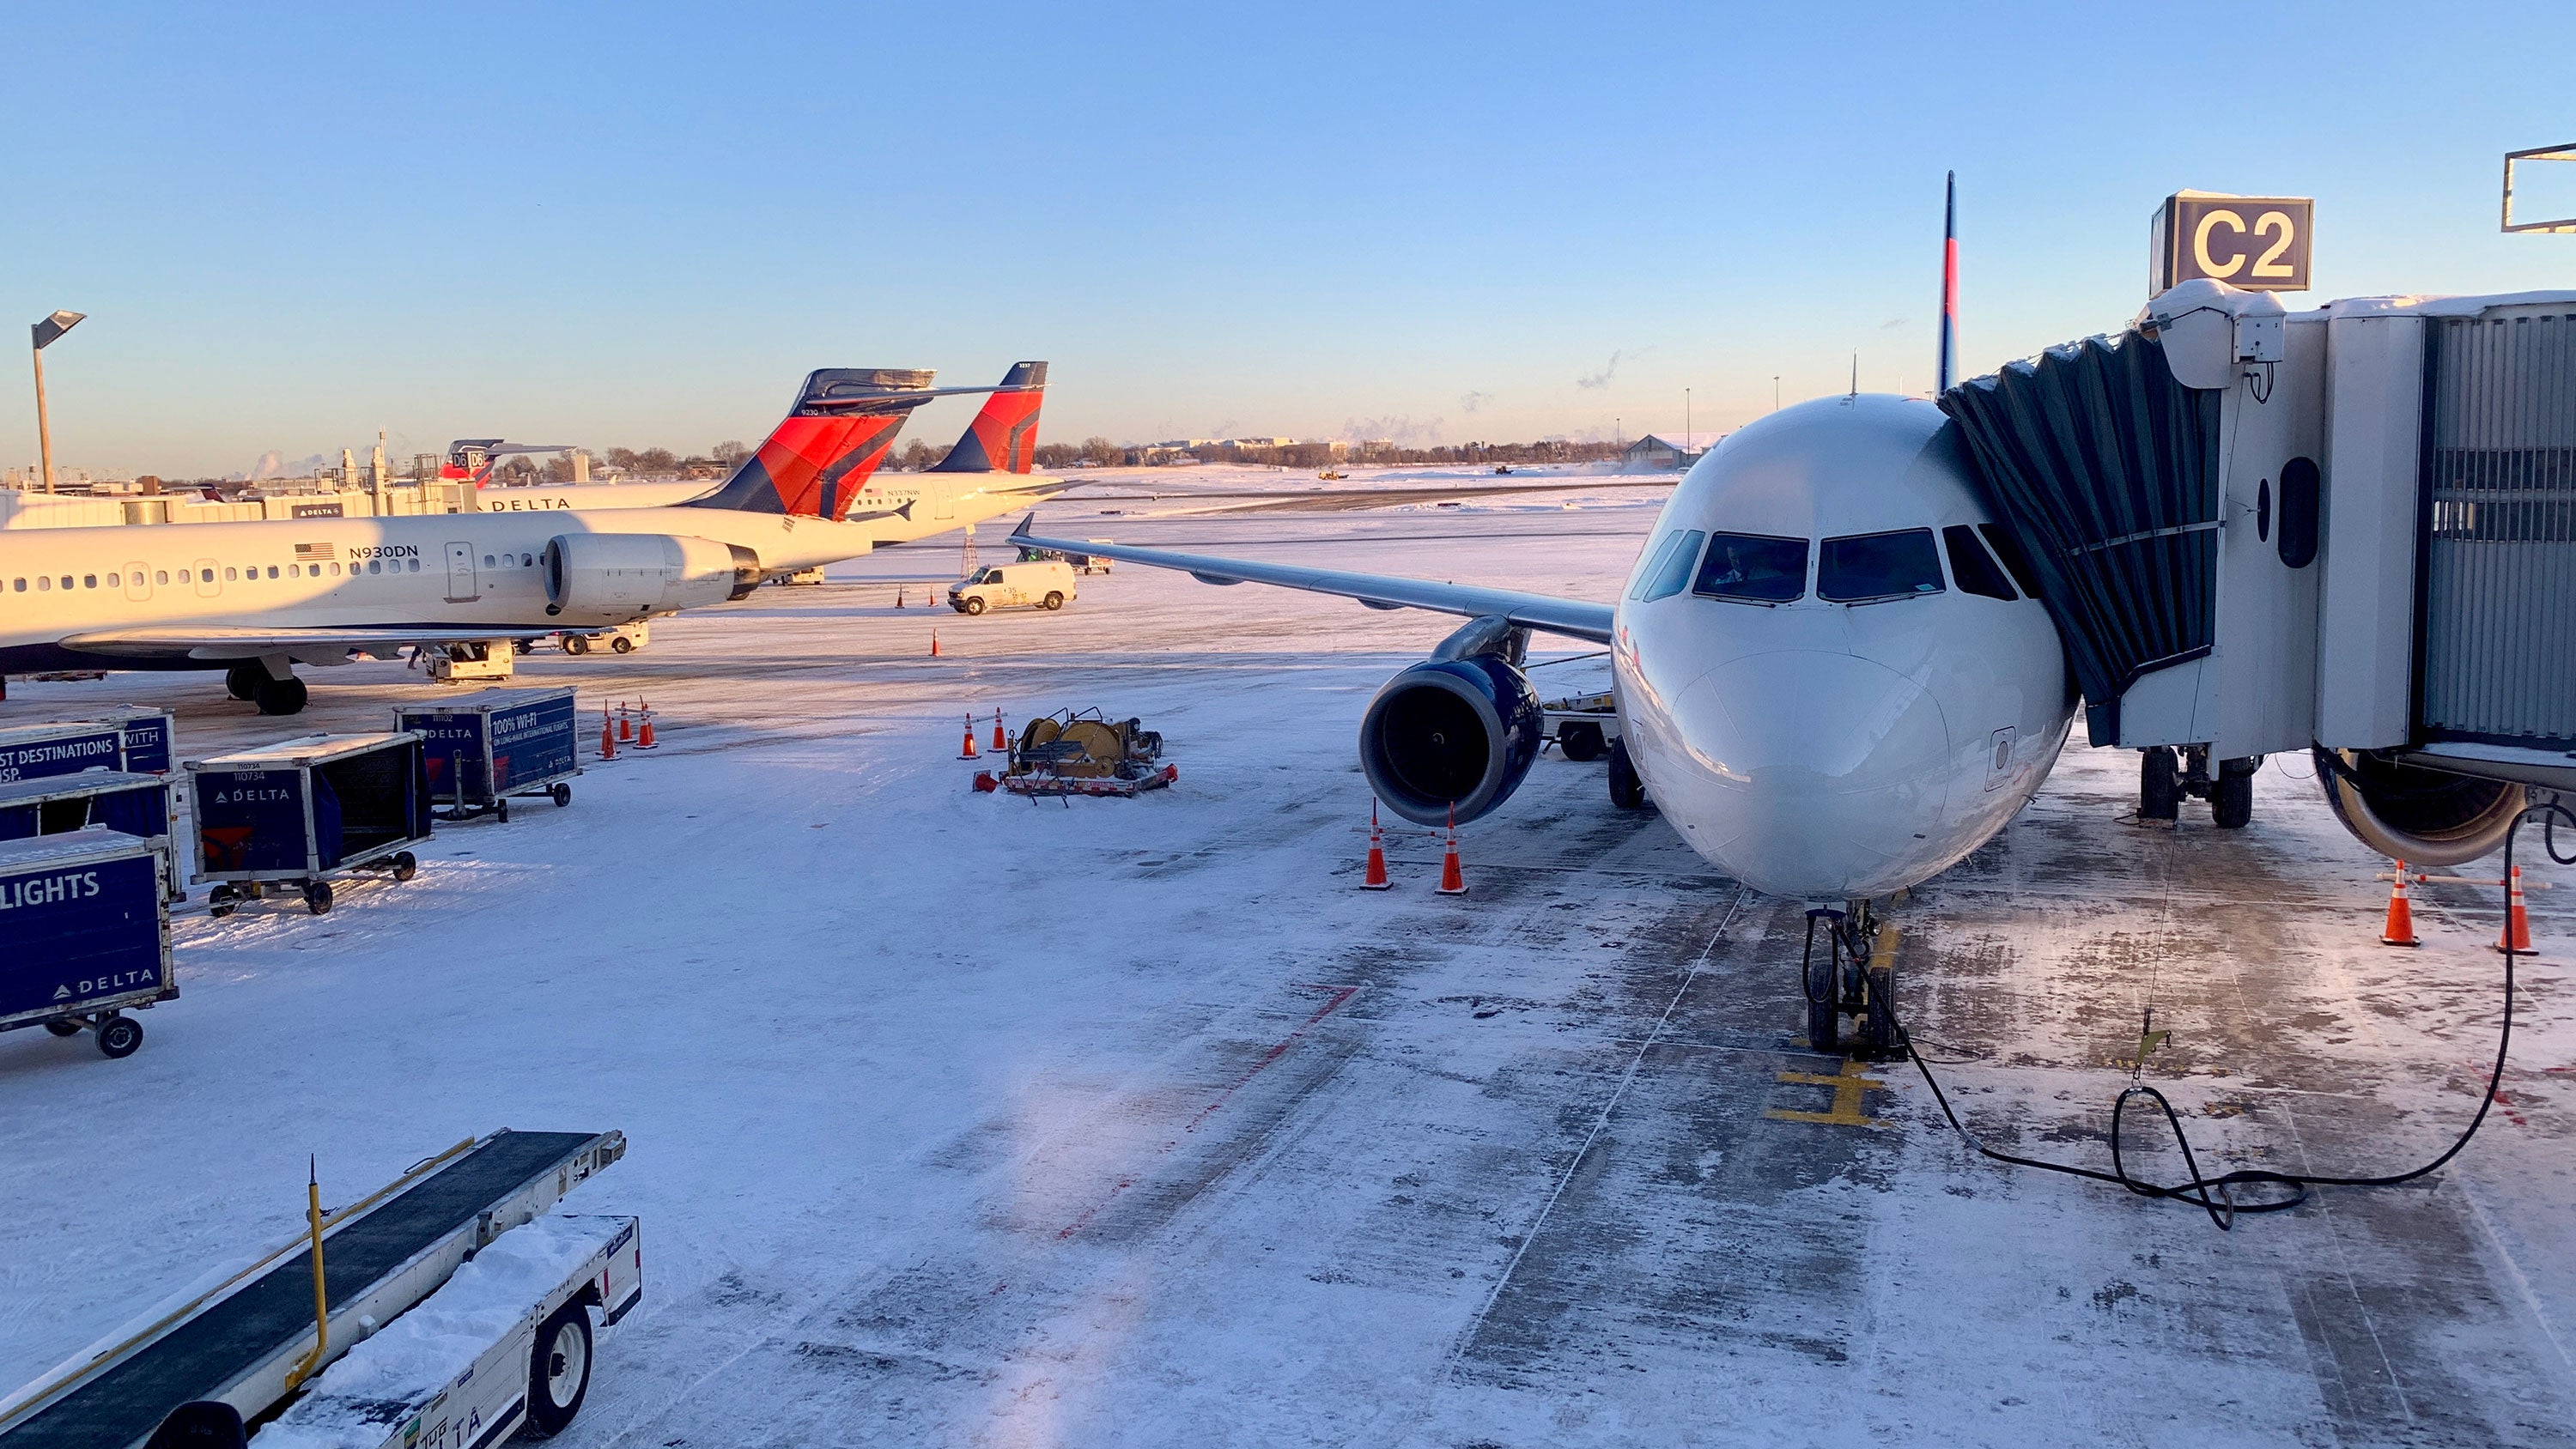 Delta finds itself in the midst of holiday chaos again, with hundreds of flight cancellations